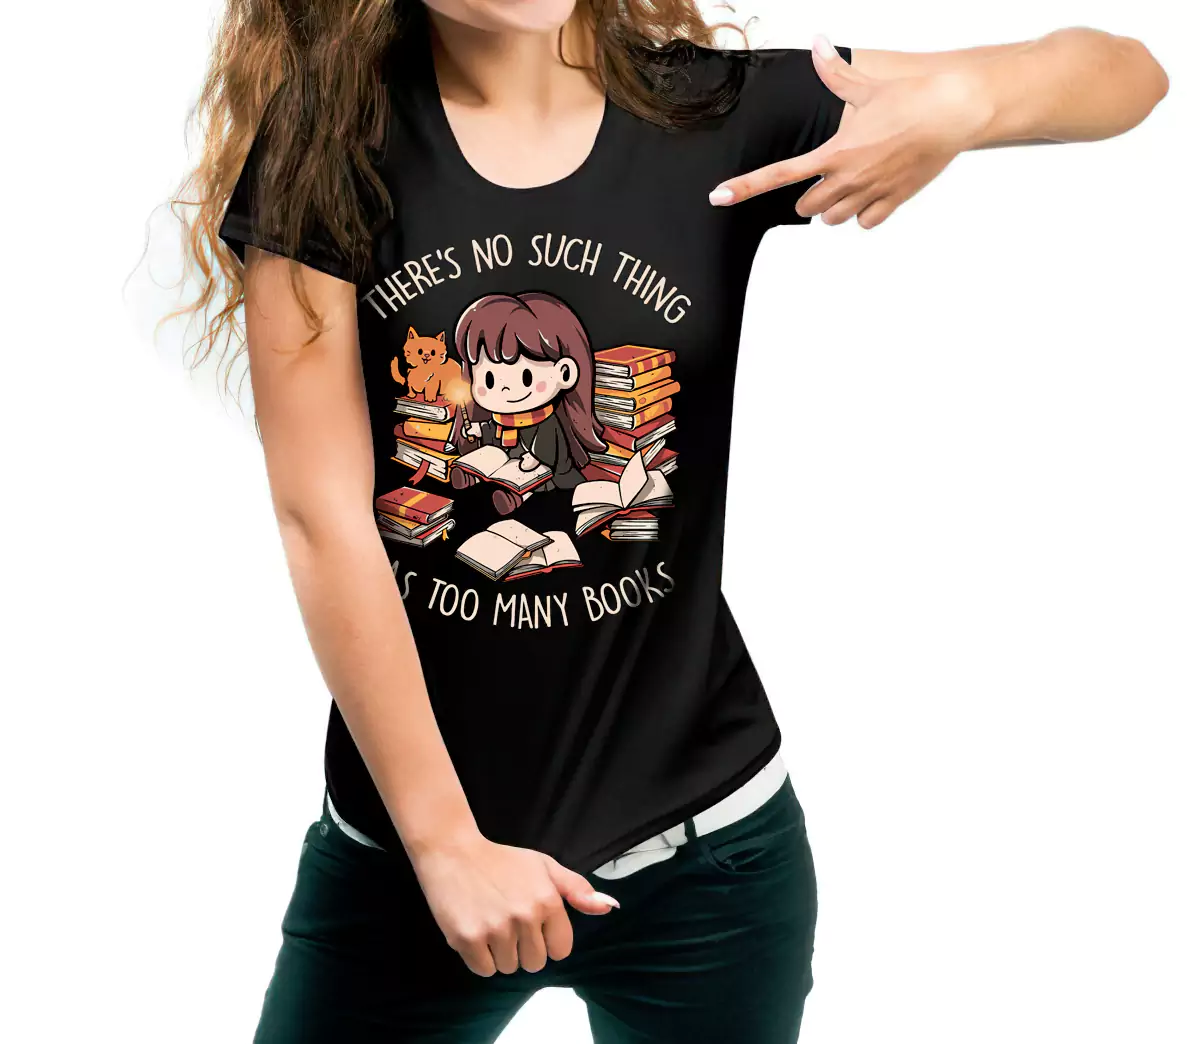 girl wearing There is no such thing as too many books t shirt